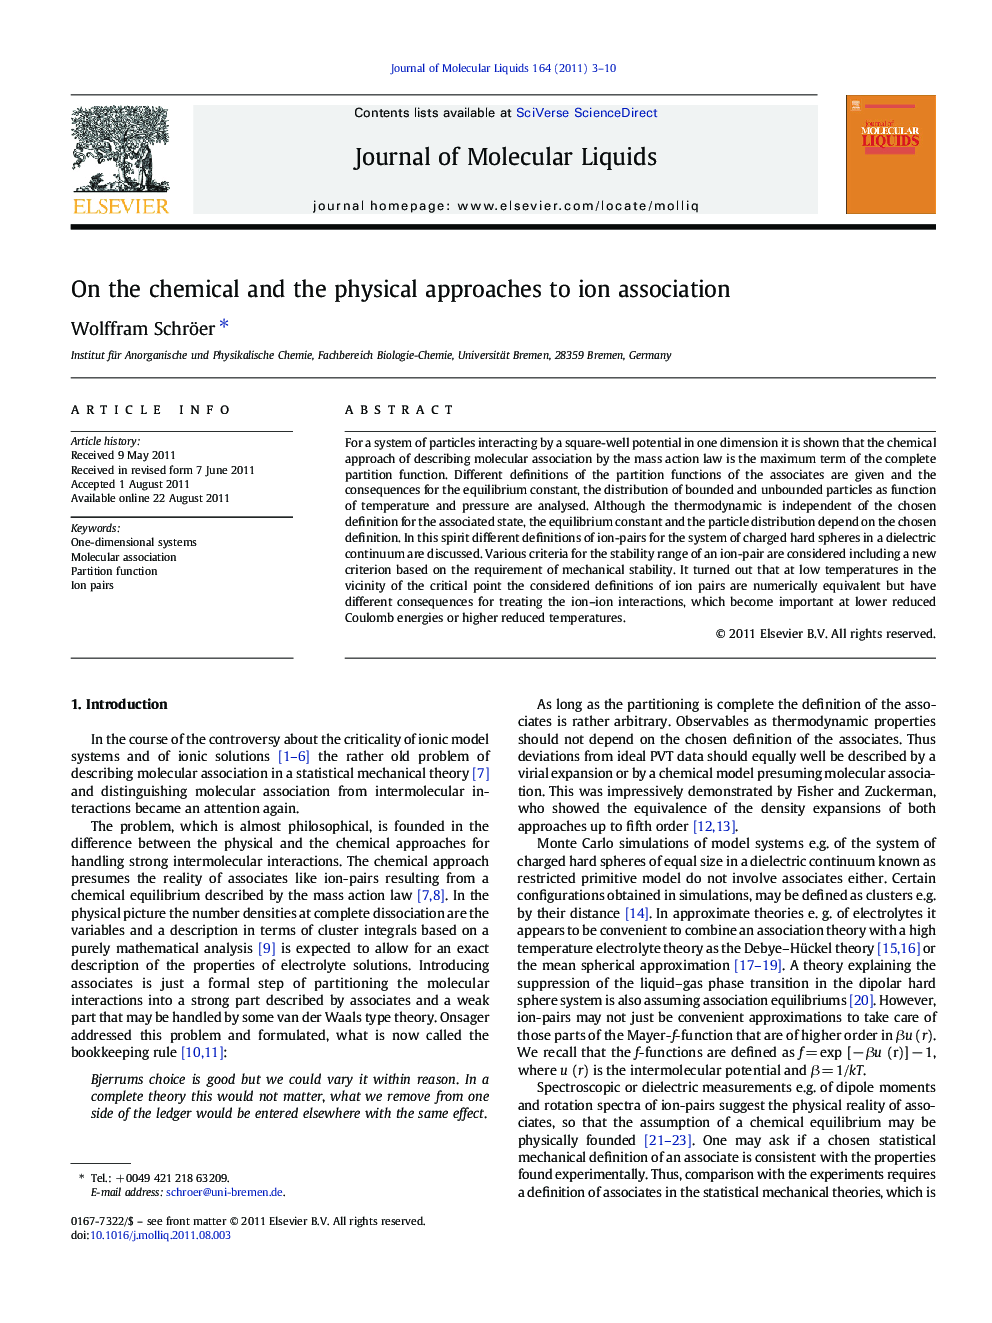 On the chemical and the physical approaches to ion association